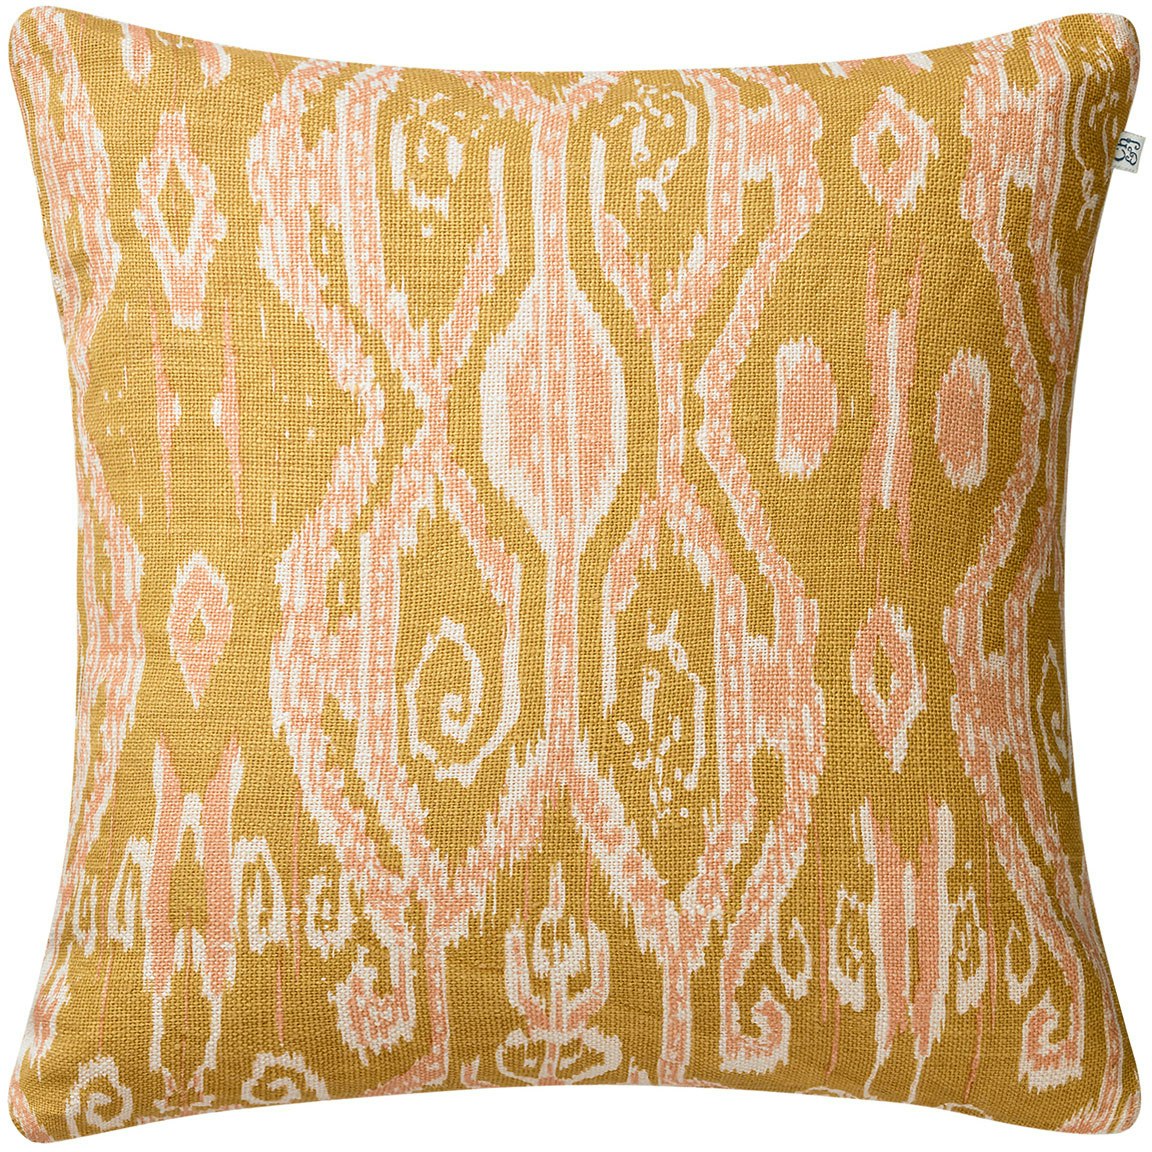 Ikat Madras Cushion Cover 50x50 cm, Spicy Yellow / Rose